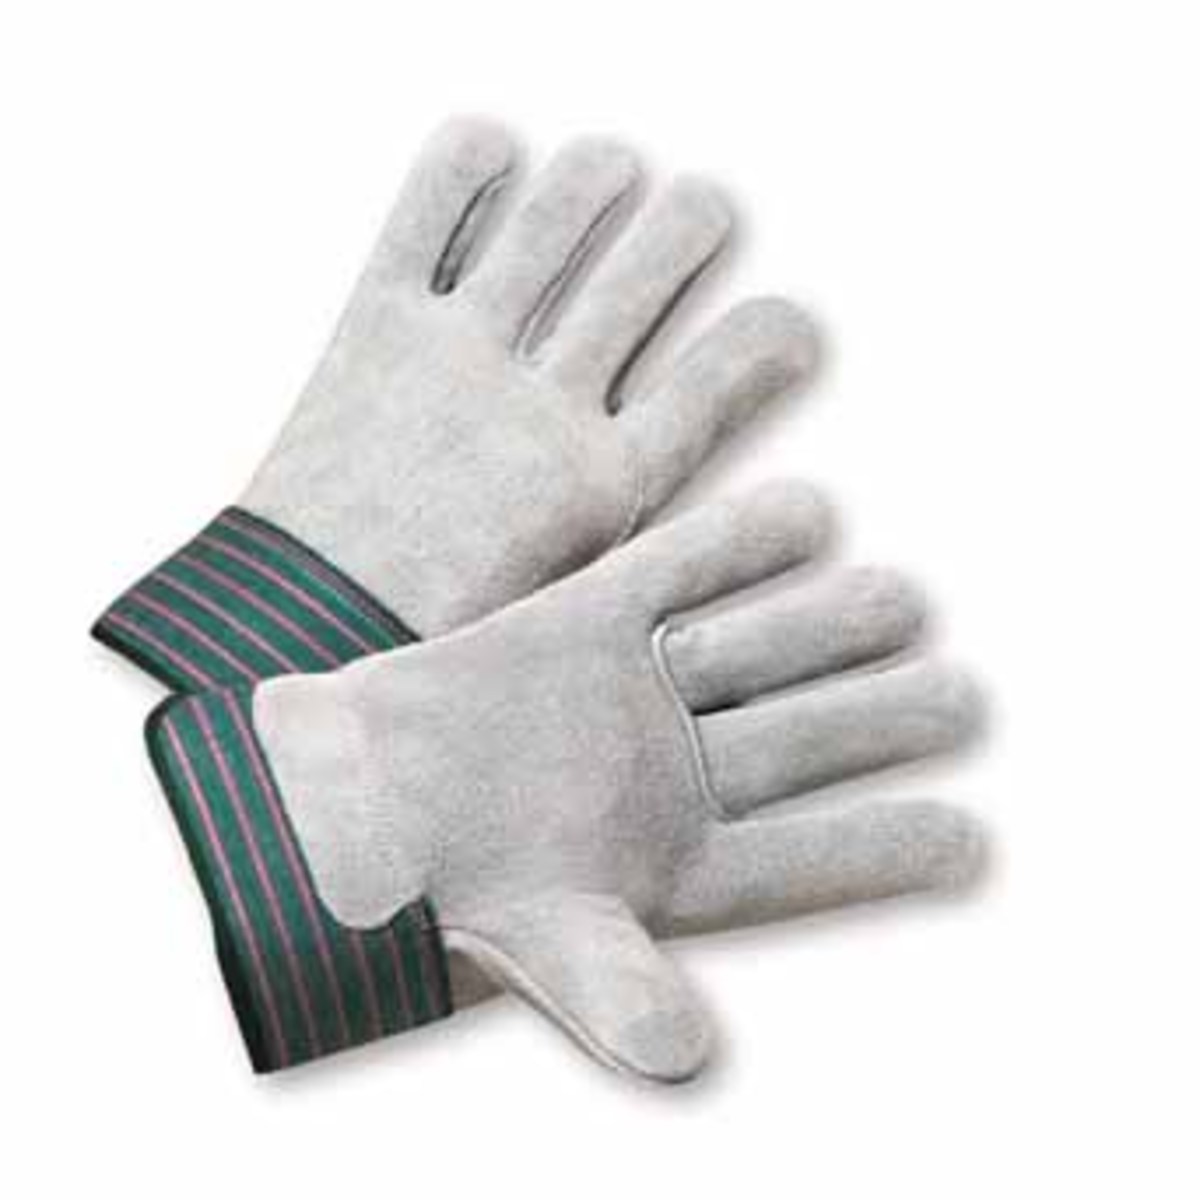 PIP® X-Large Select Split Leather Palm Gloves With Leather Back And Rubberized Safety Cuff